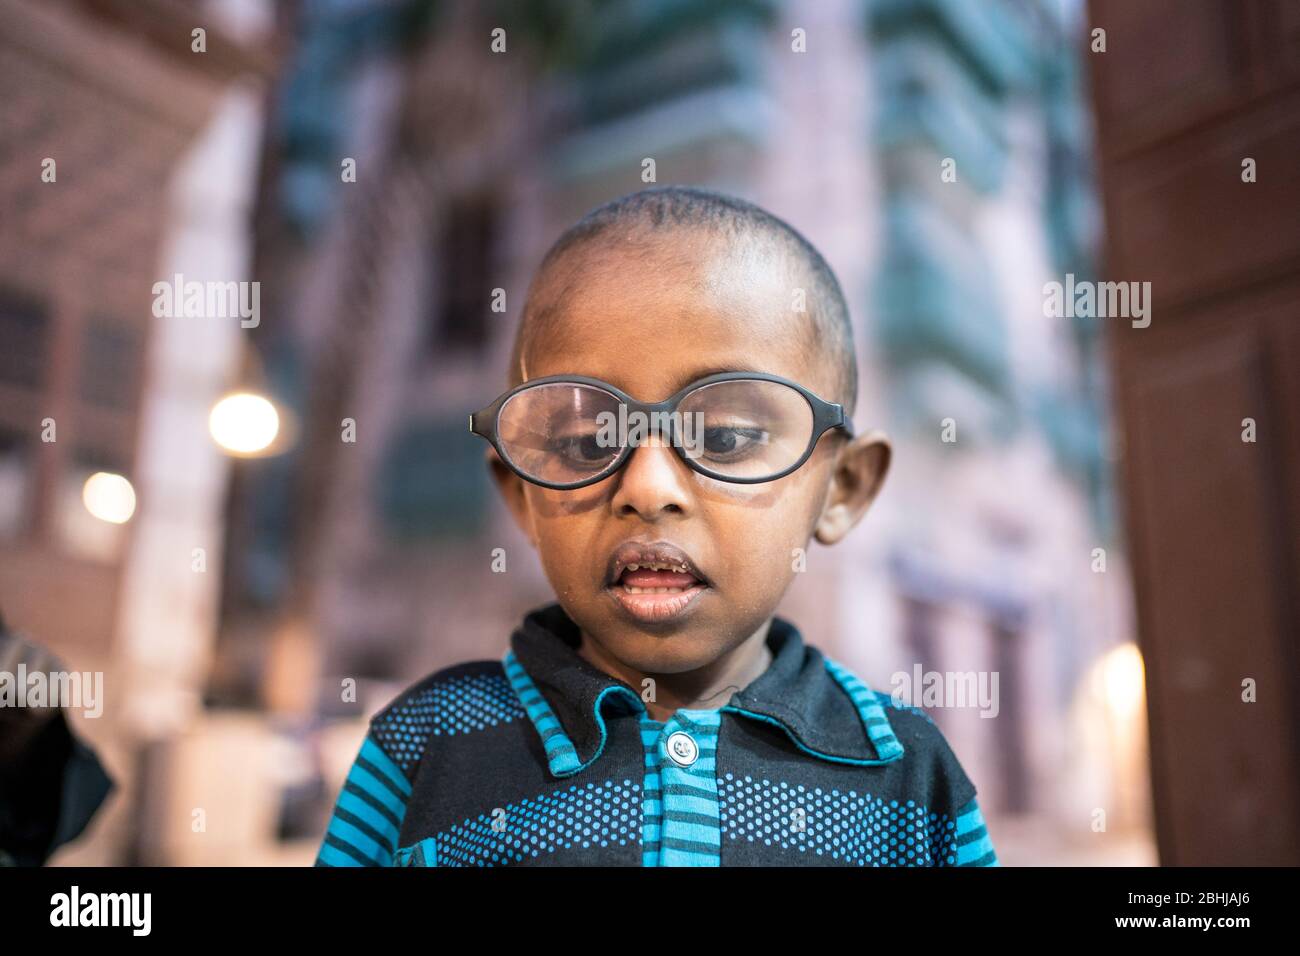 Jeddah / Saudi Arabia - January 16, 2020: Portrait of cute Saudi little boy with glasses with colorful historic buildings of downtown Jeddah in the background Stock Photo